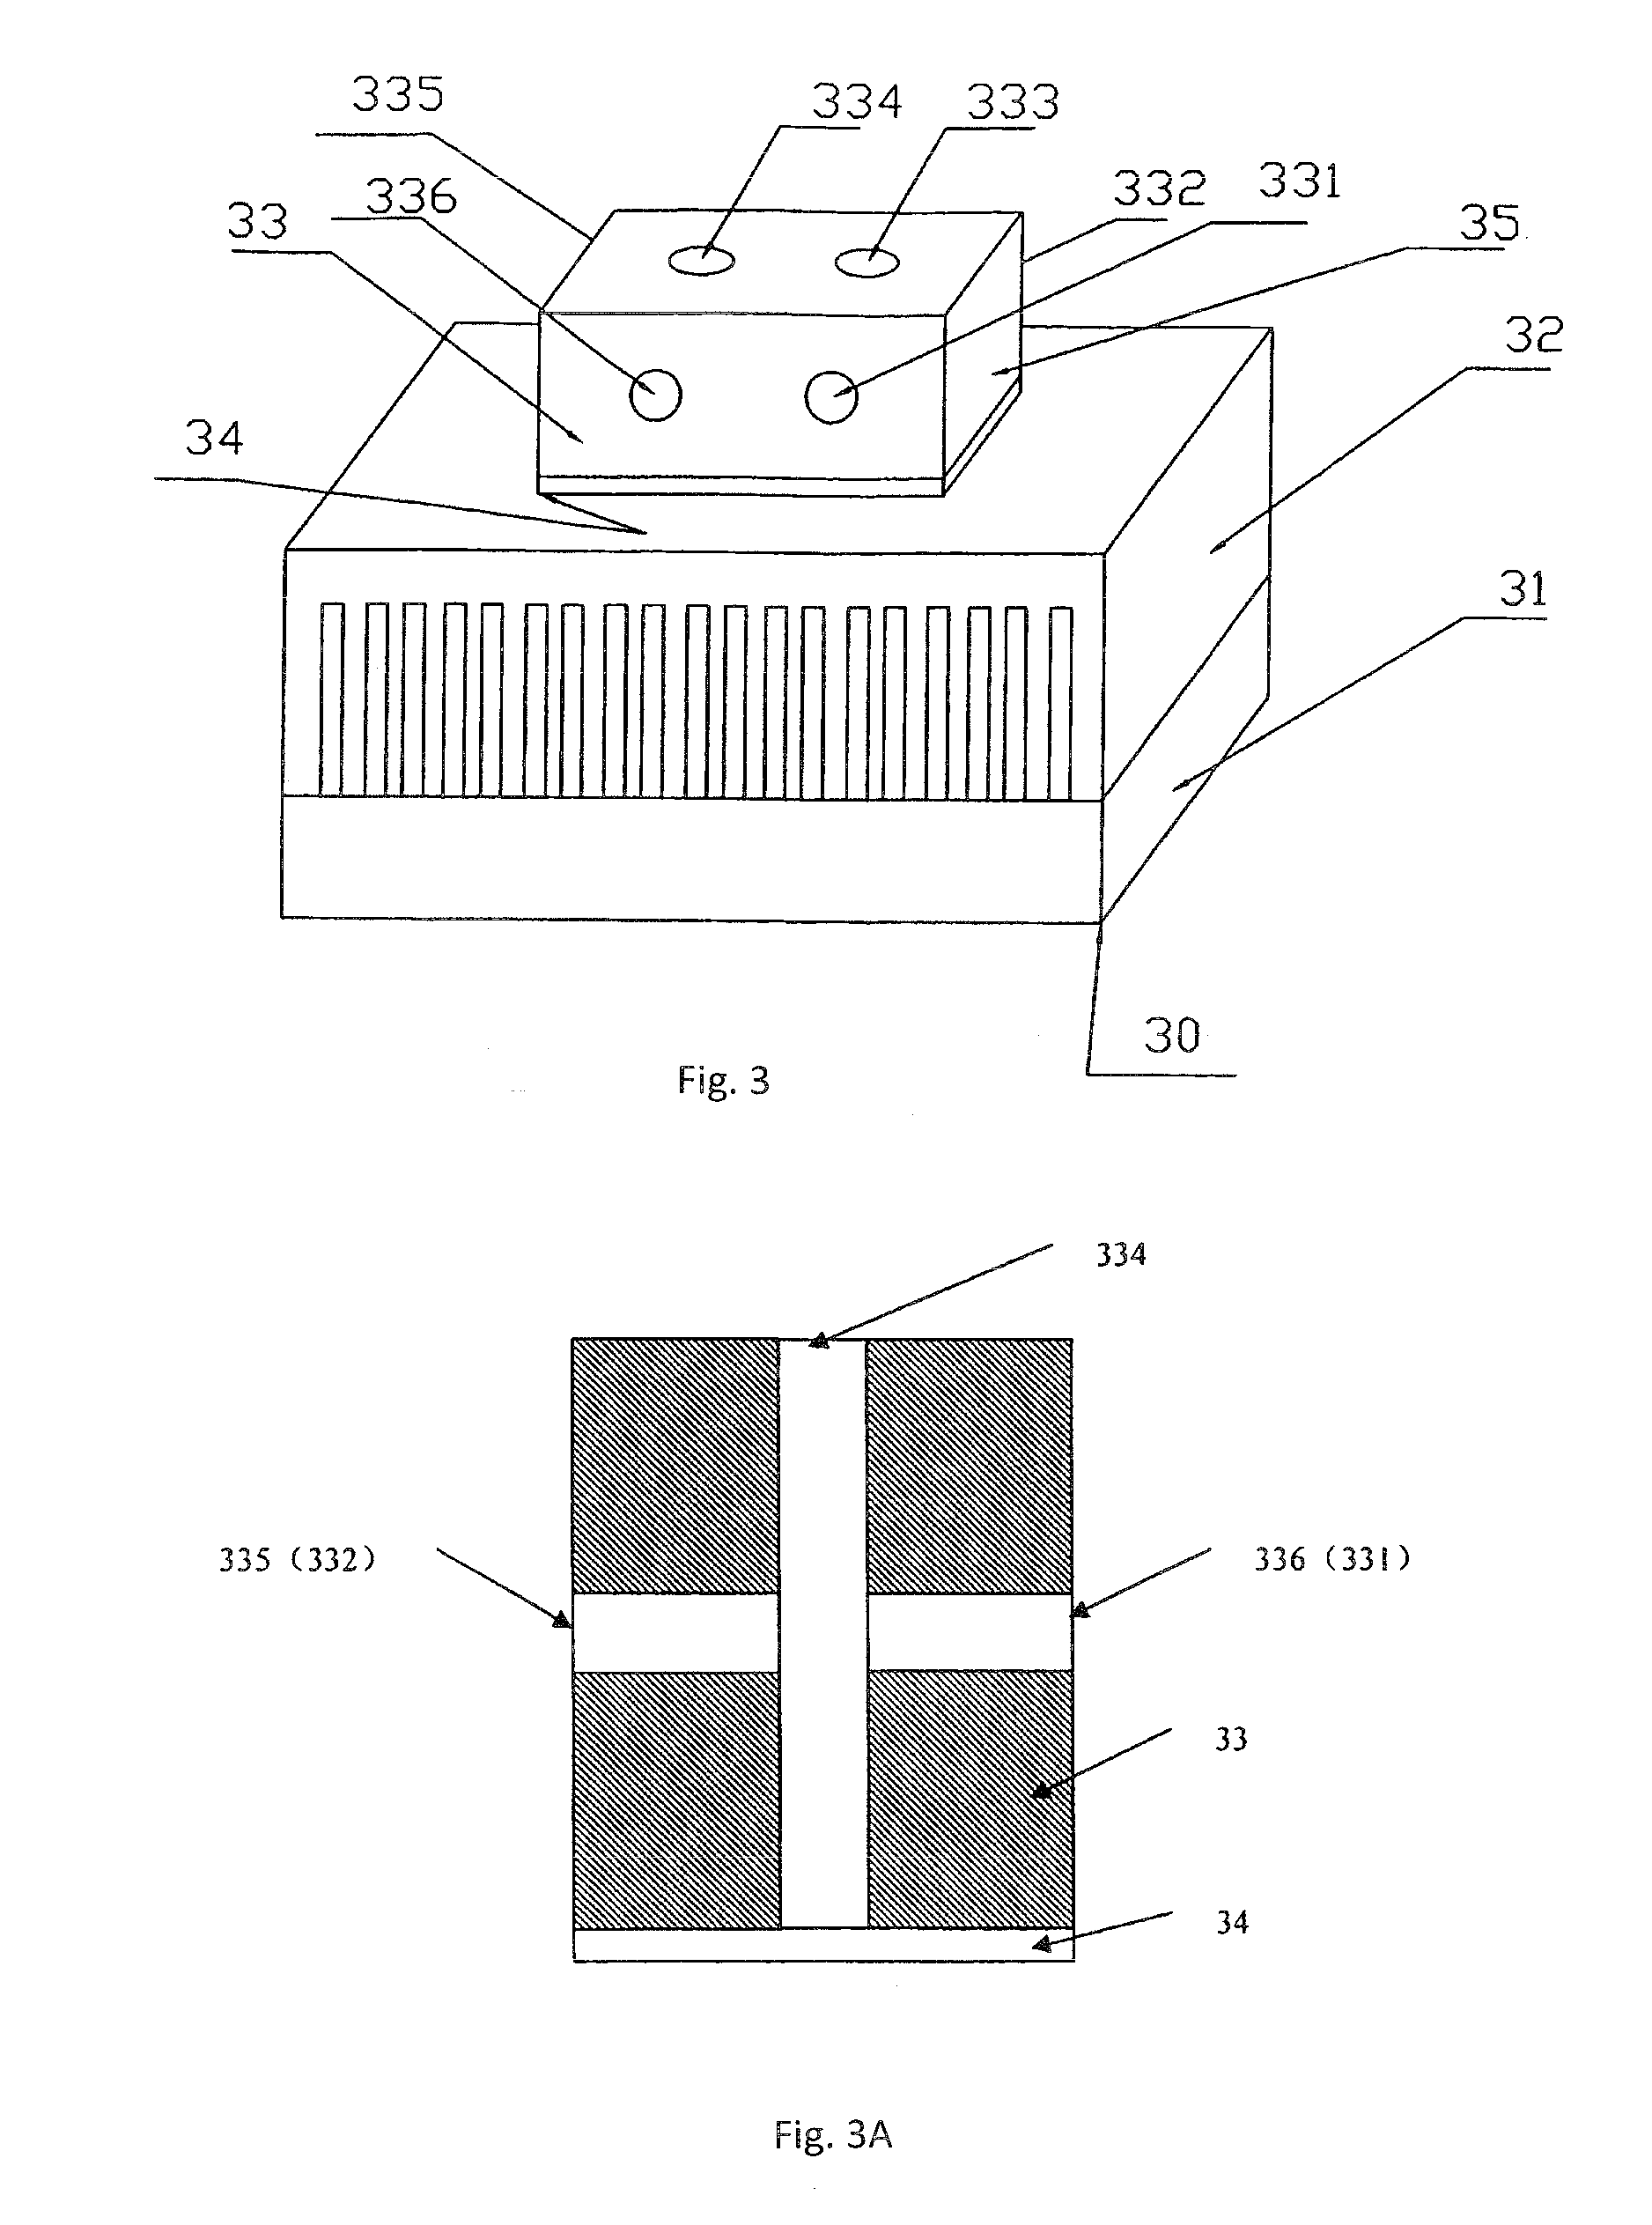 Adulterated peanut oil detector and adulterated peanut oil detection method